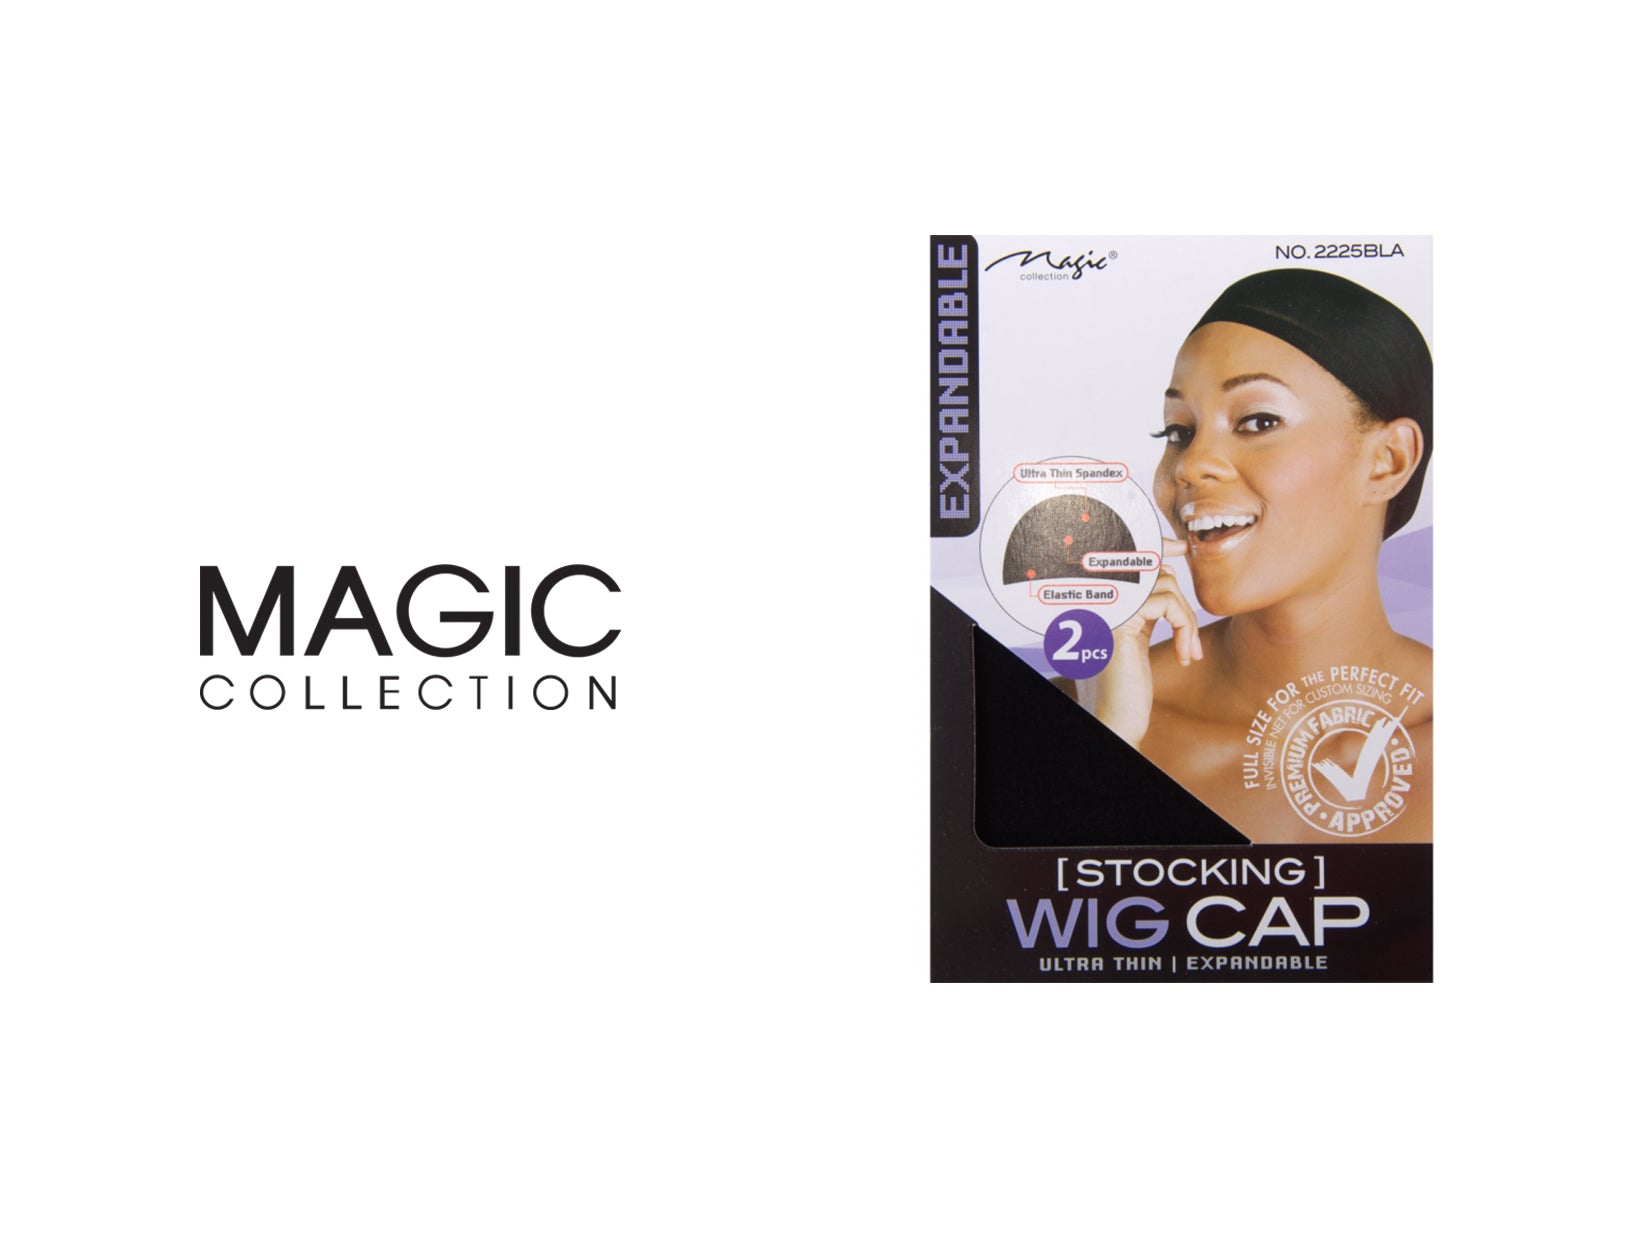 MAGIC COLLECTION ULTRA THIN STOCKING WIG CAP